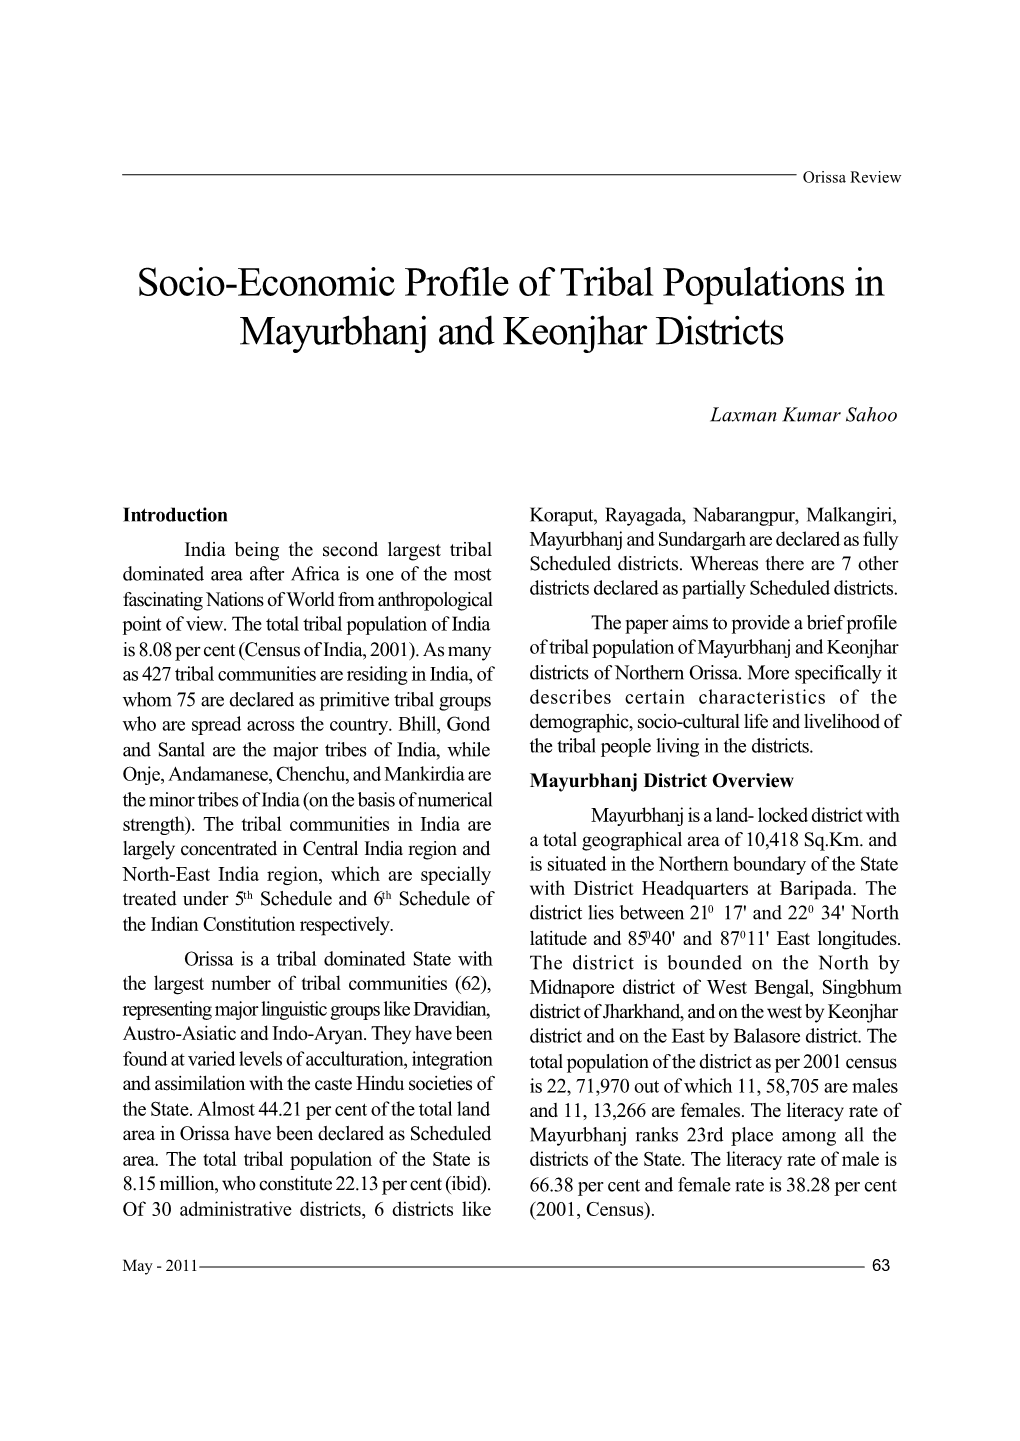 Socio-Economic Profile of Tribal Populations in Mayurbhanj and Keonjhar Districts